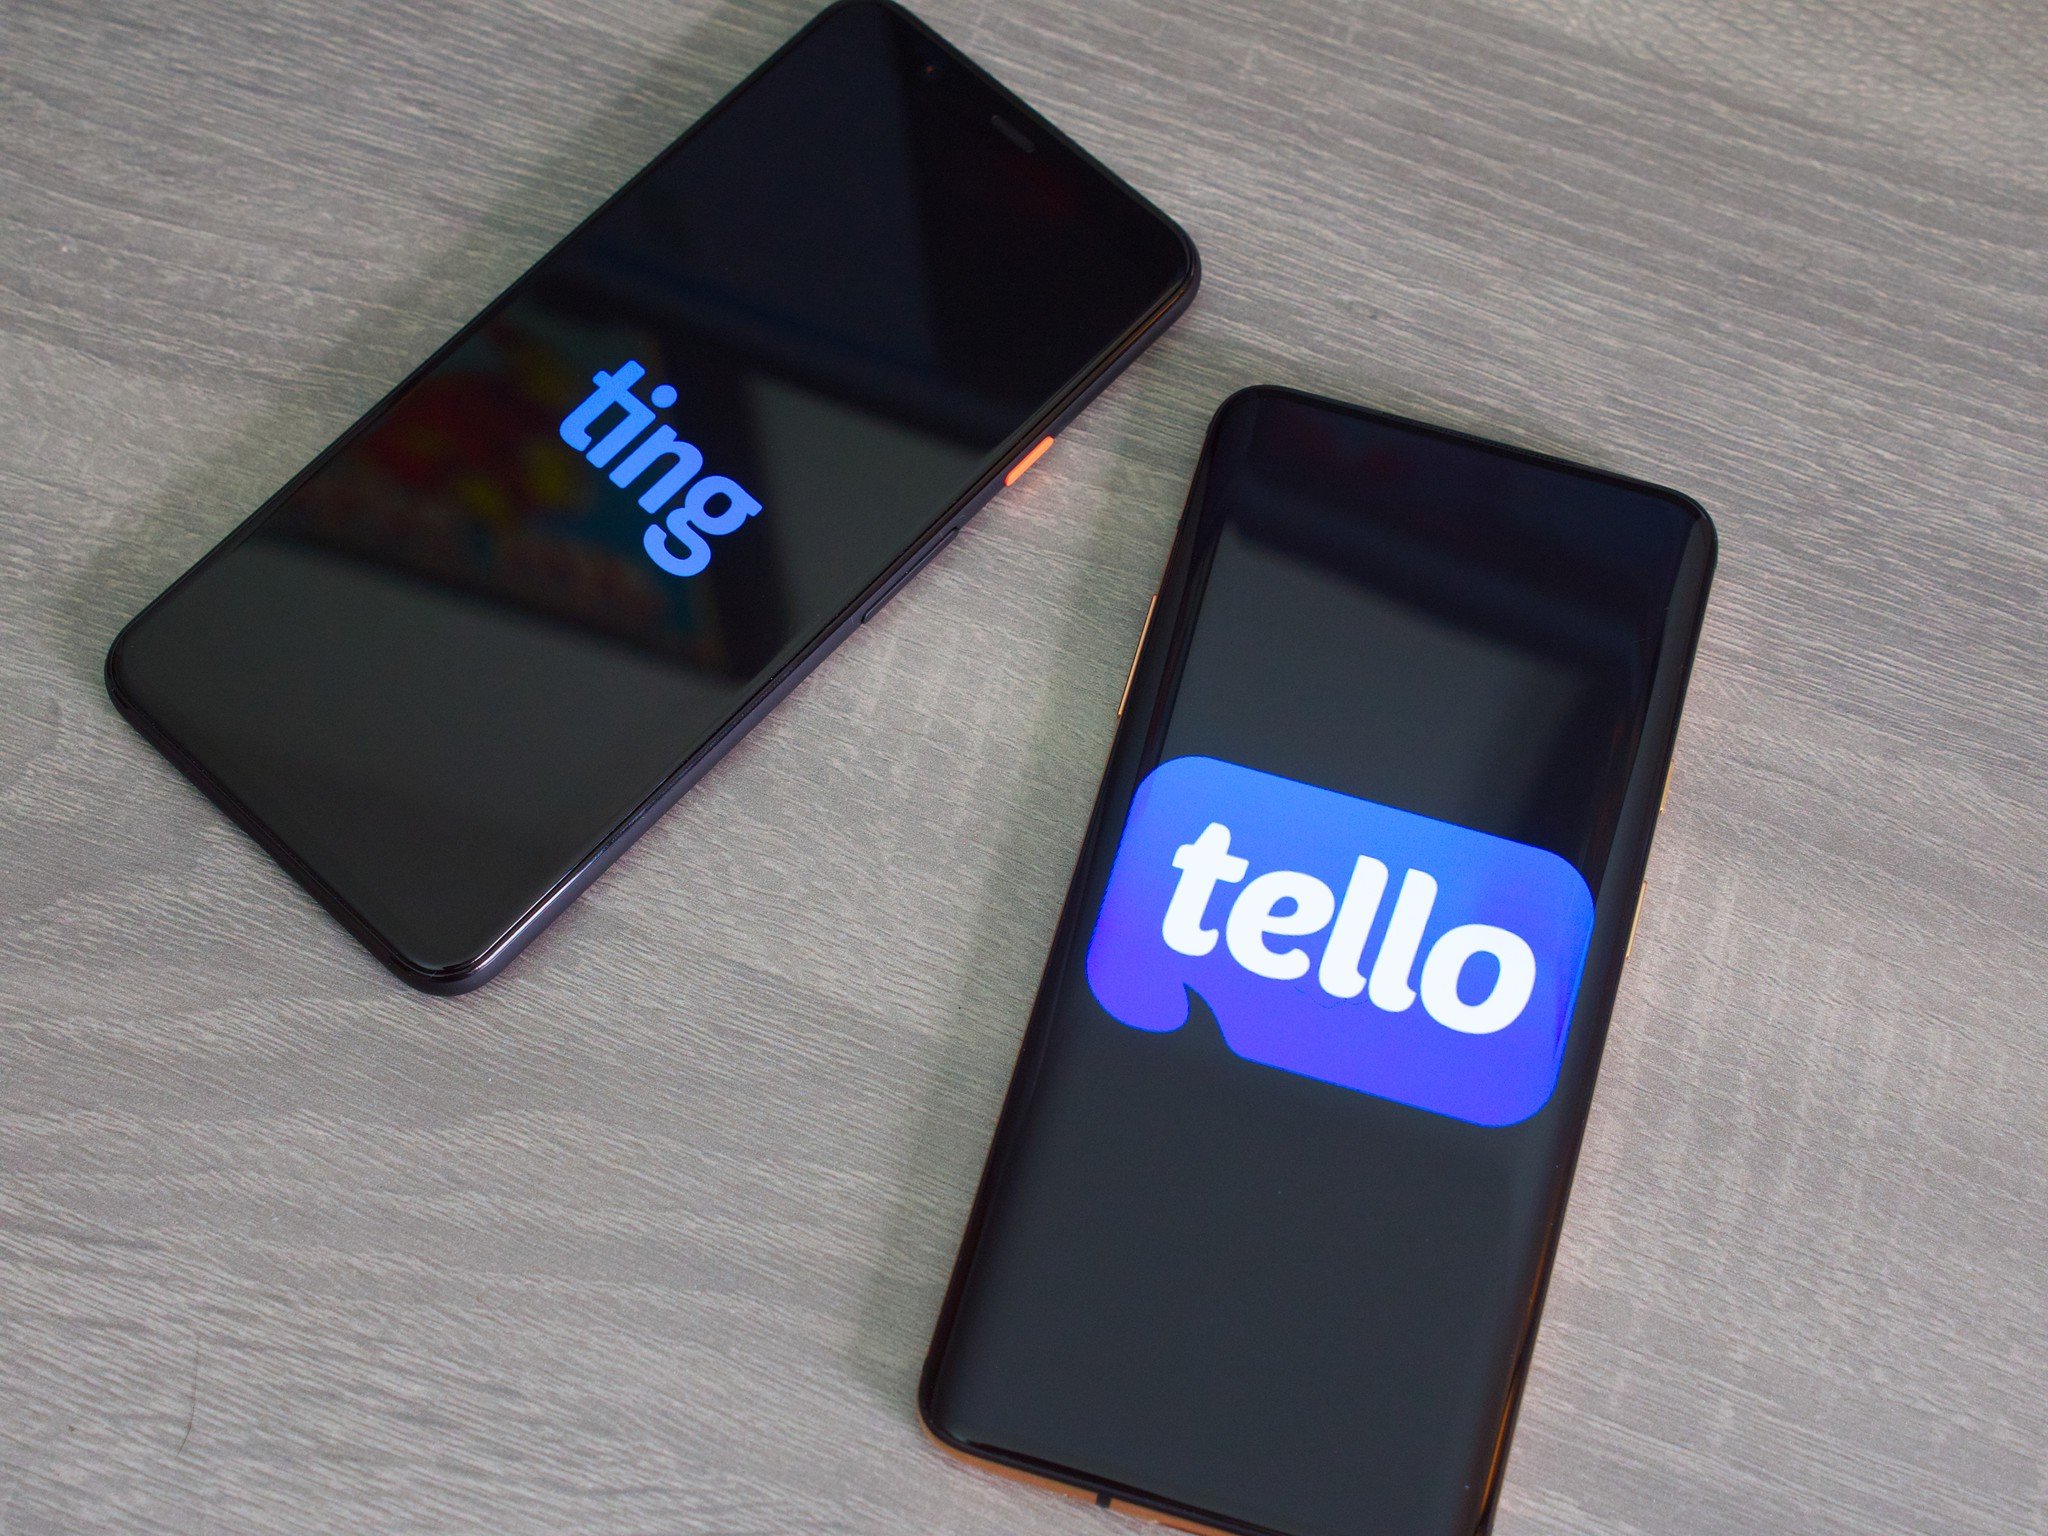 Ting and Tello logos on a Google Pixel 4 XL and OnePlus 7 Pro